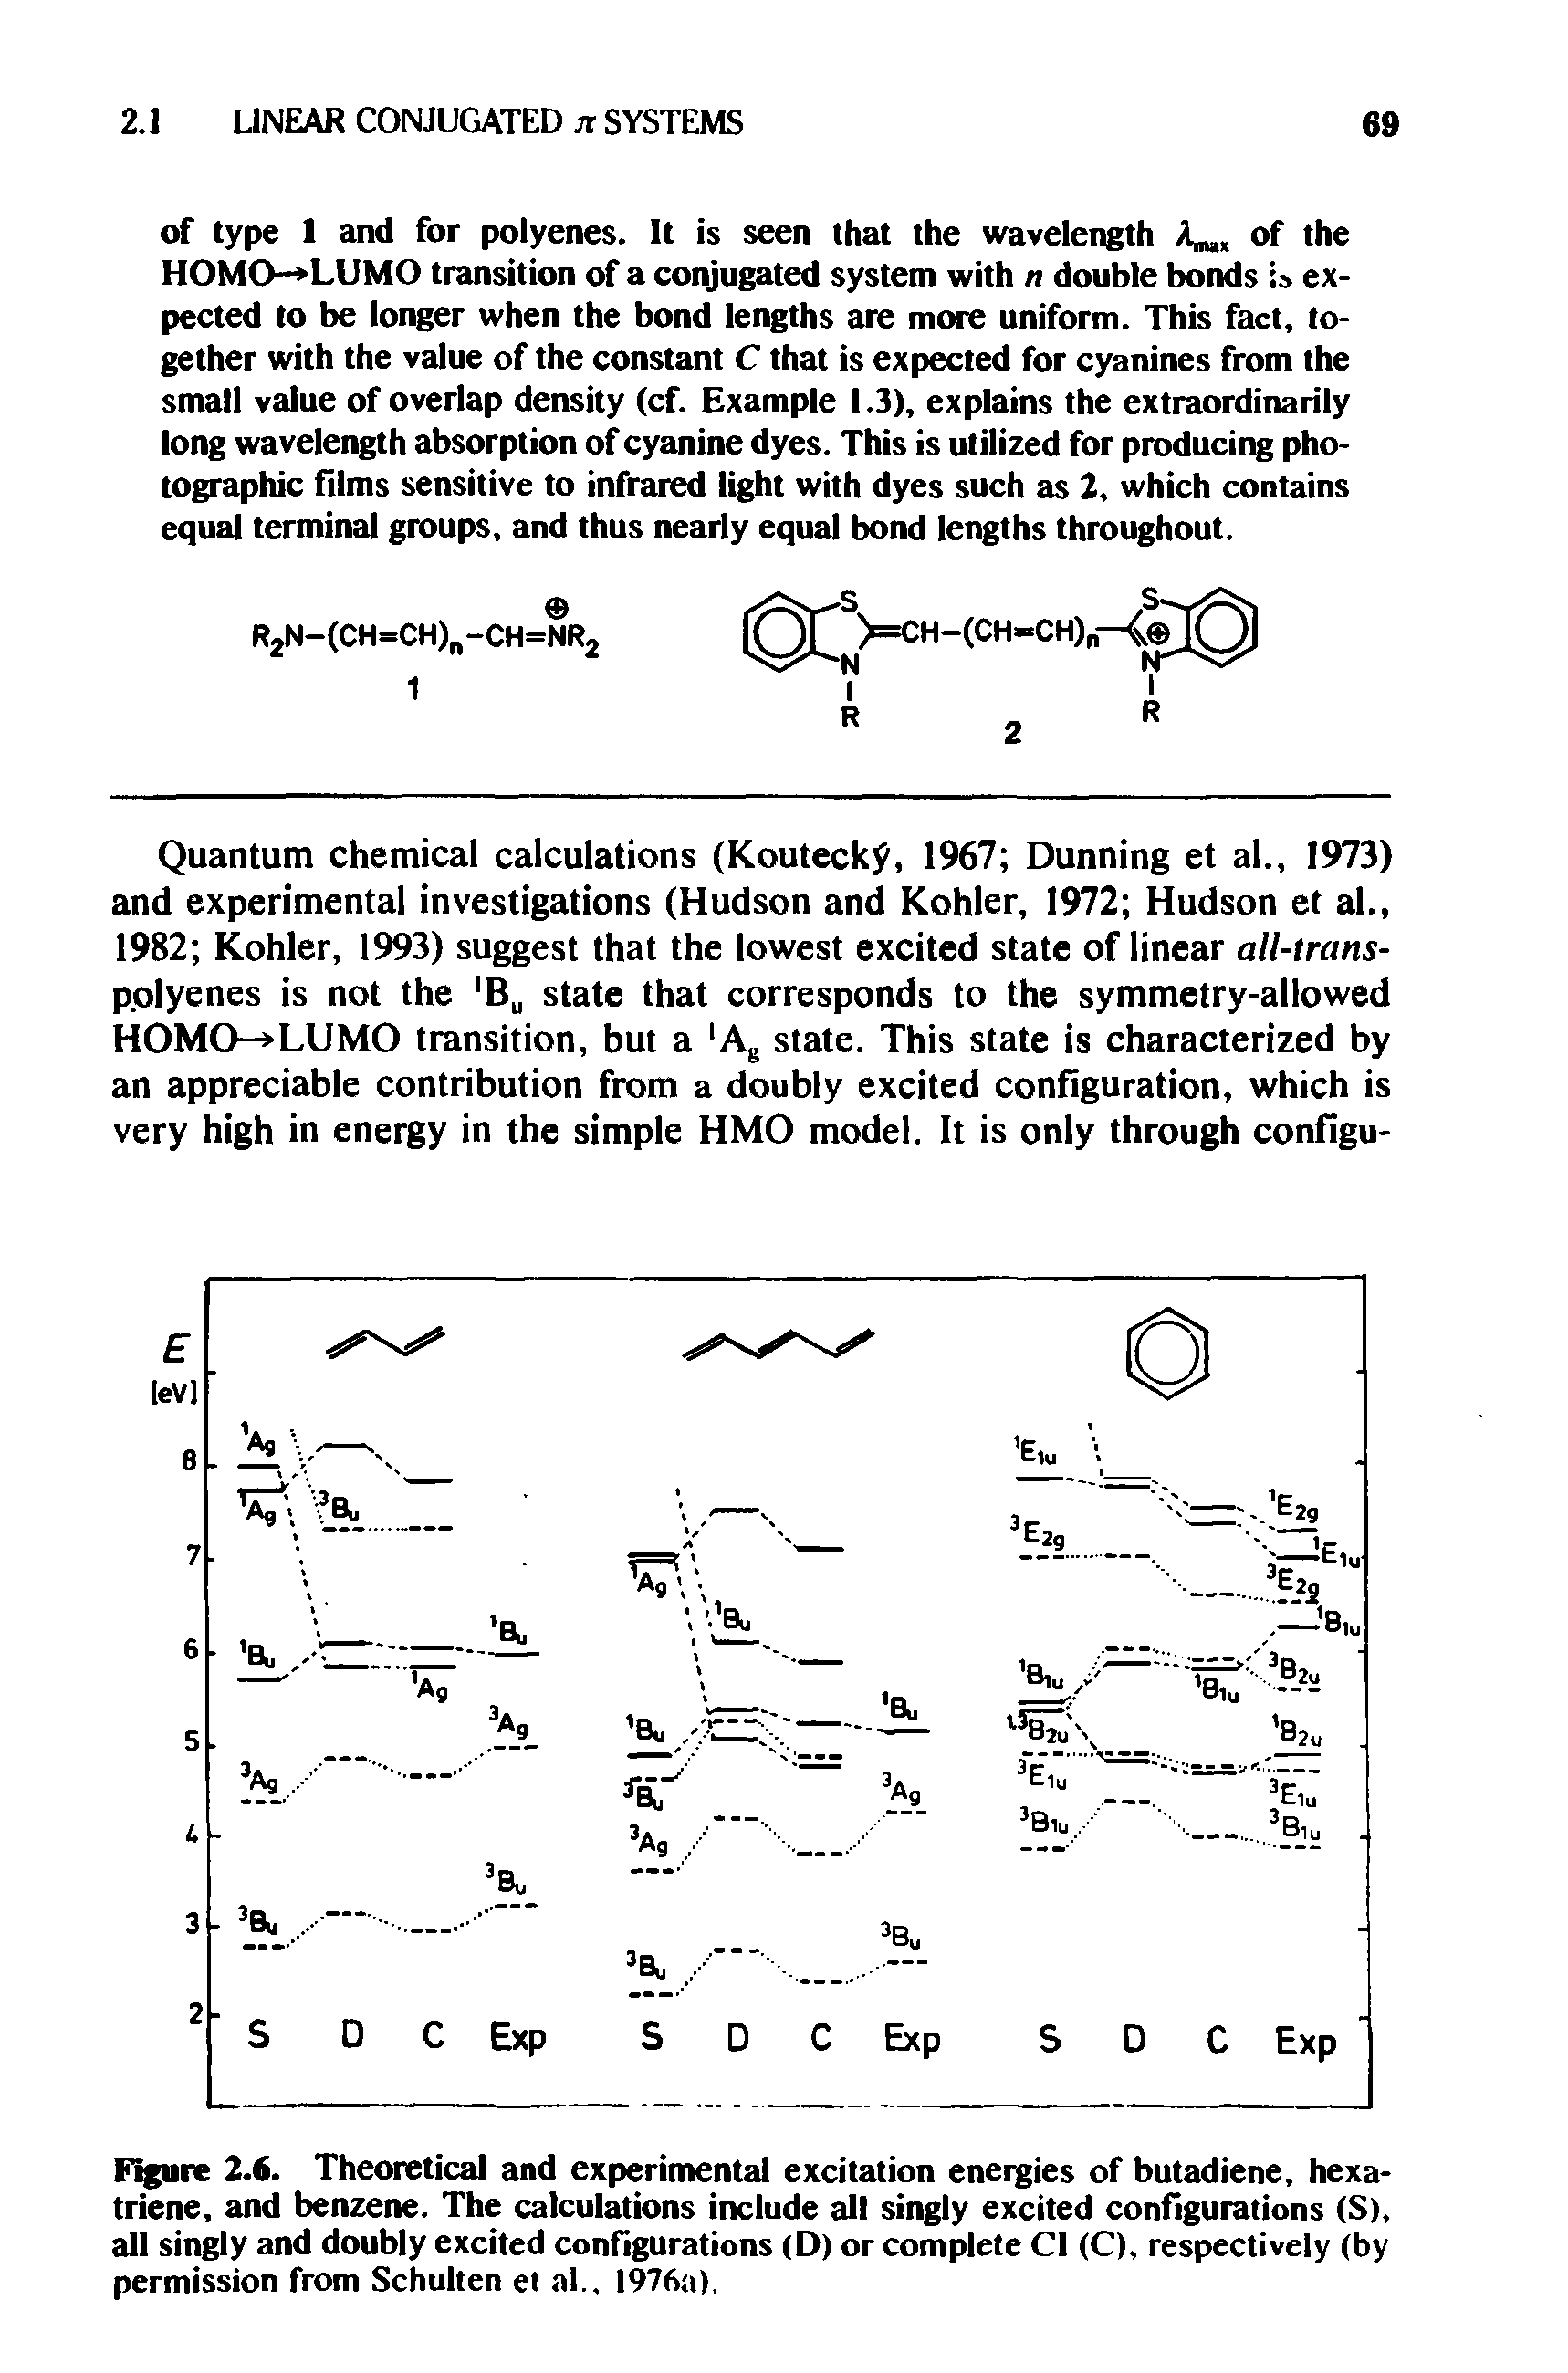 Figure 2.6. Theoretical and experimental excitation energies of butadiene, hexa-triene, and benzene. The calculations include all singly excited configurations (S). all singly and doubly excited configurations (D) or complete Cl (C), respectively (by permission from Schulten et al.. 1976a).